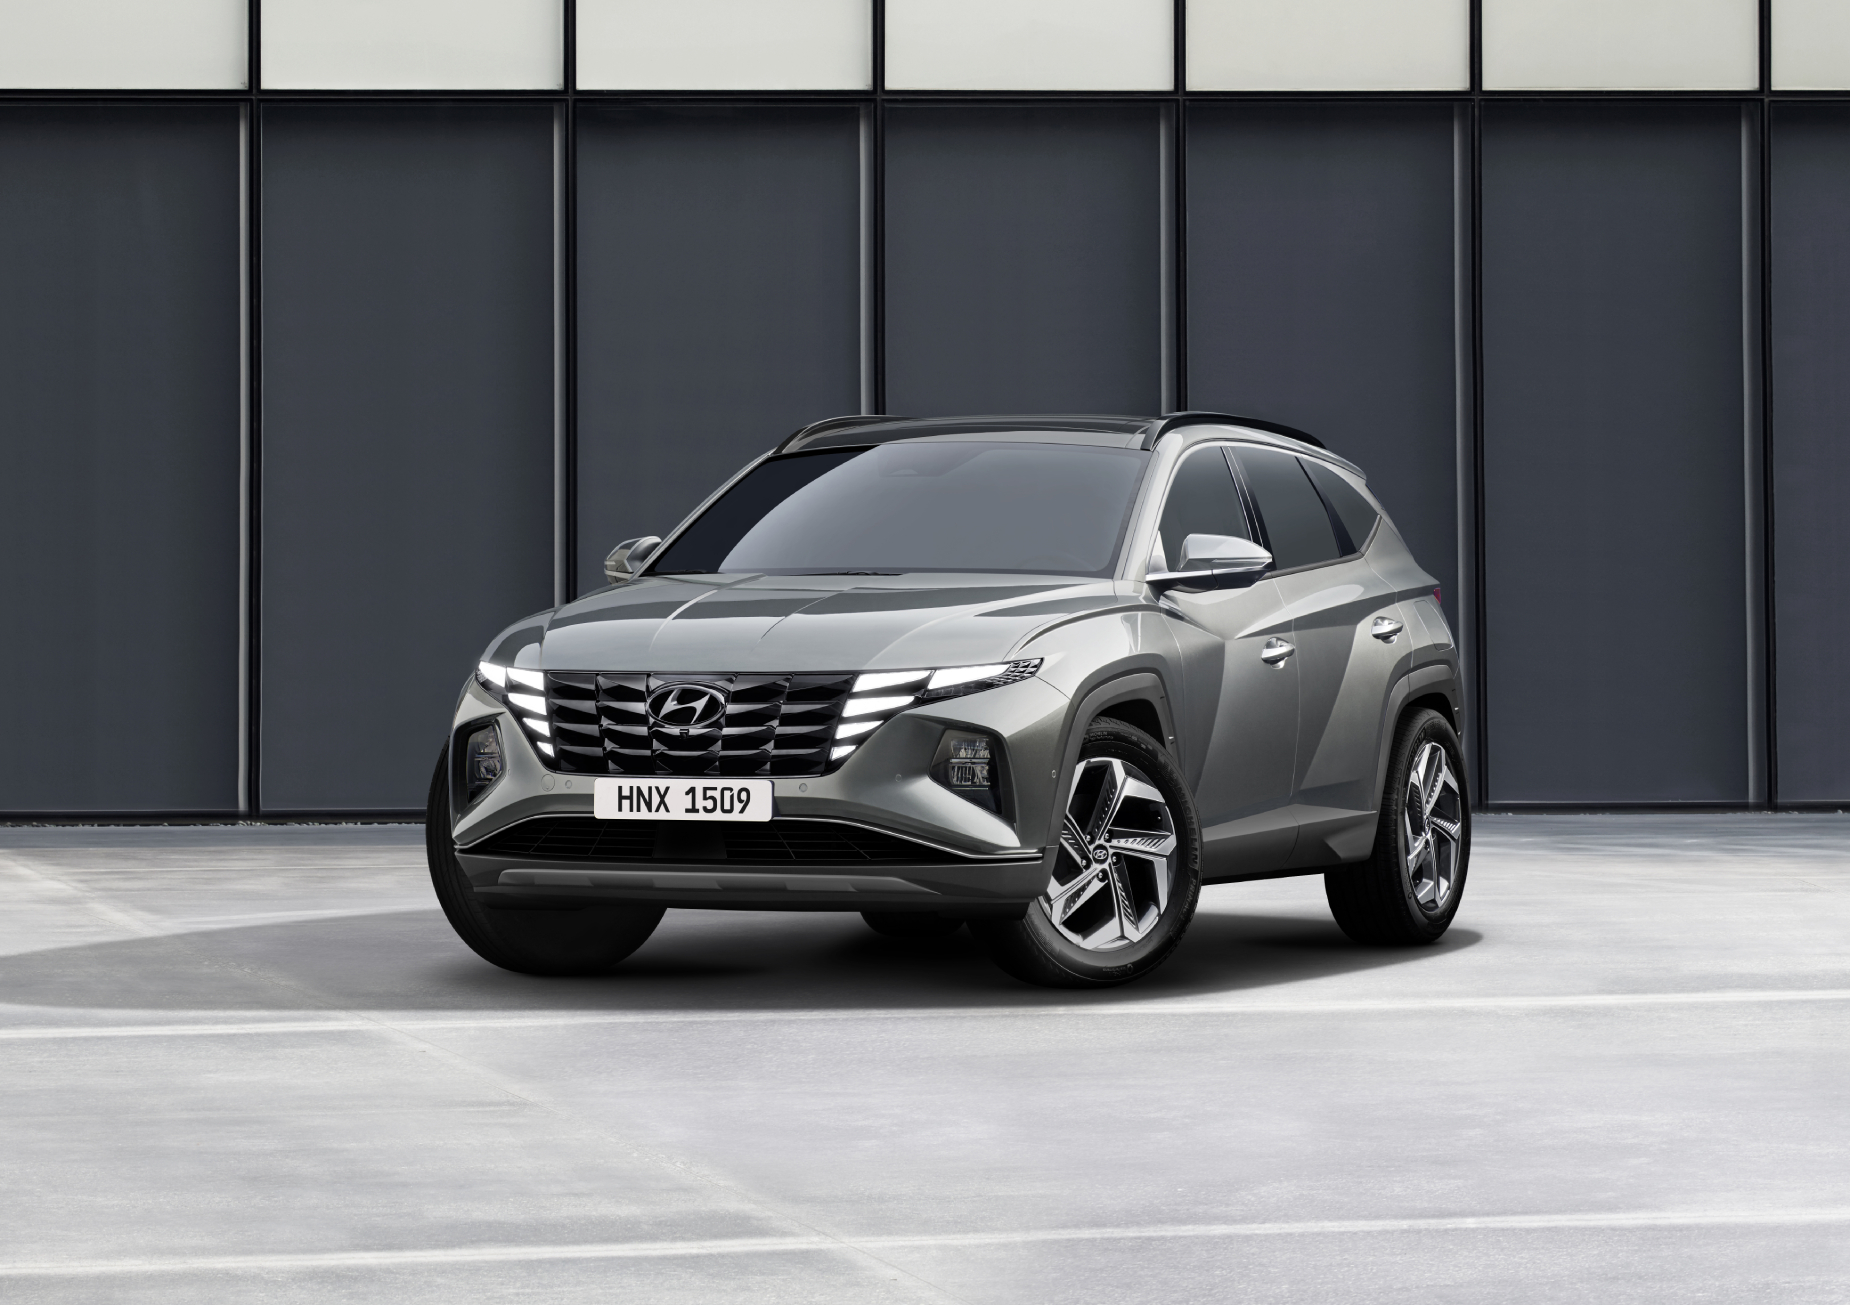 A grey 2022 Hyundai Tucson parked in front of a wall on display